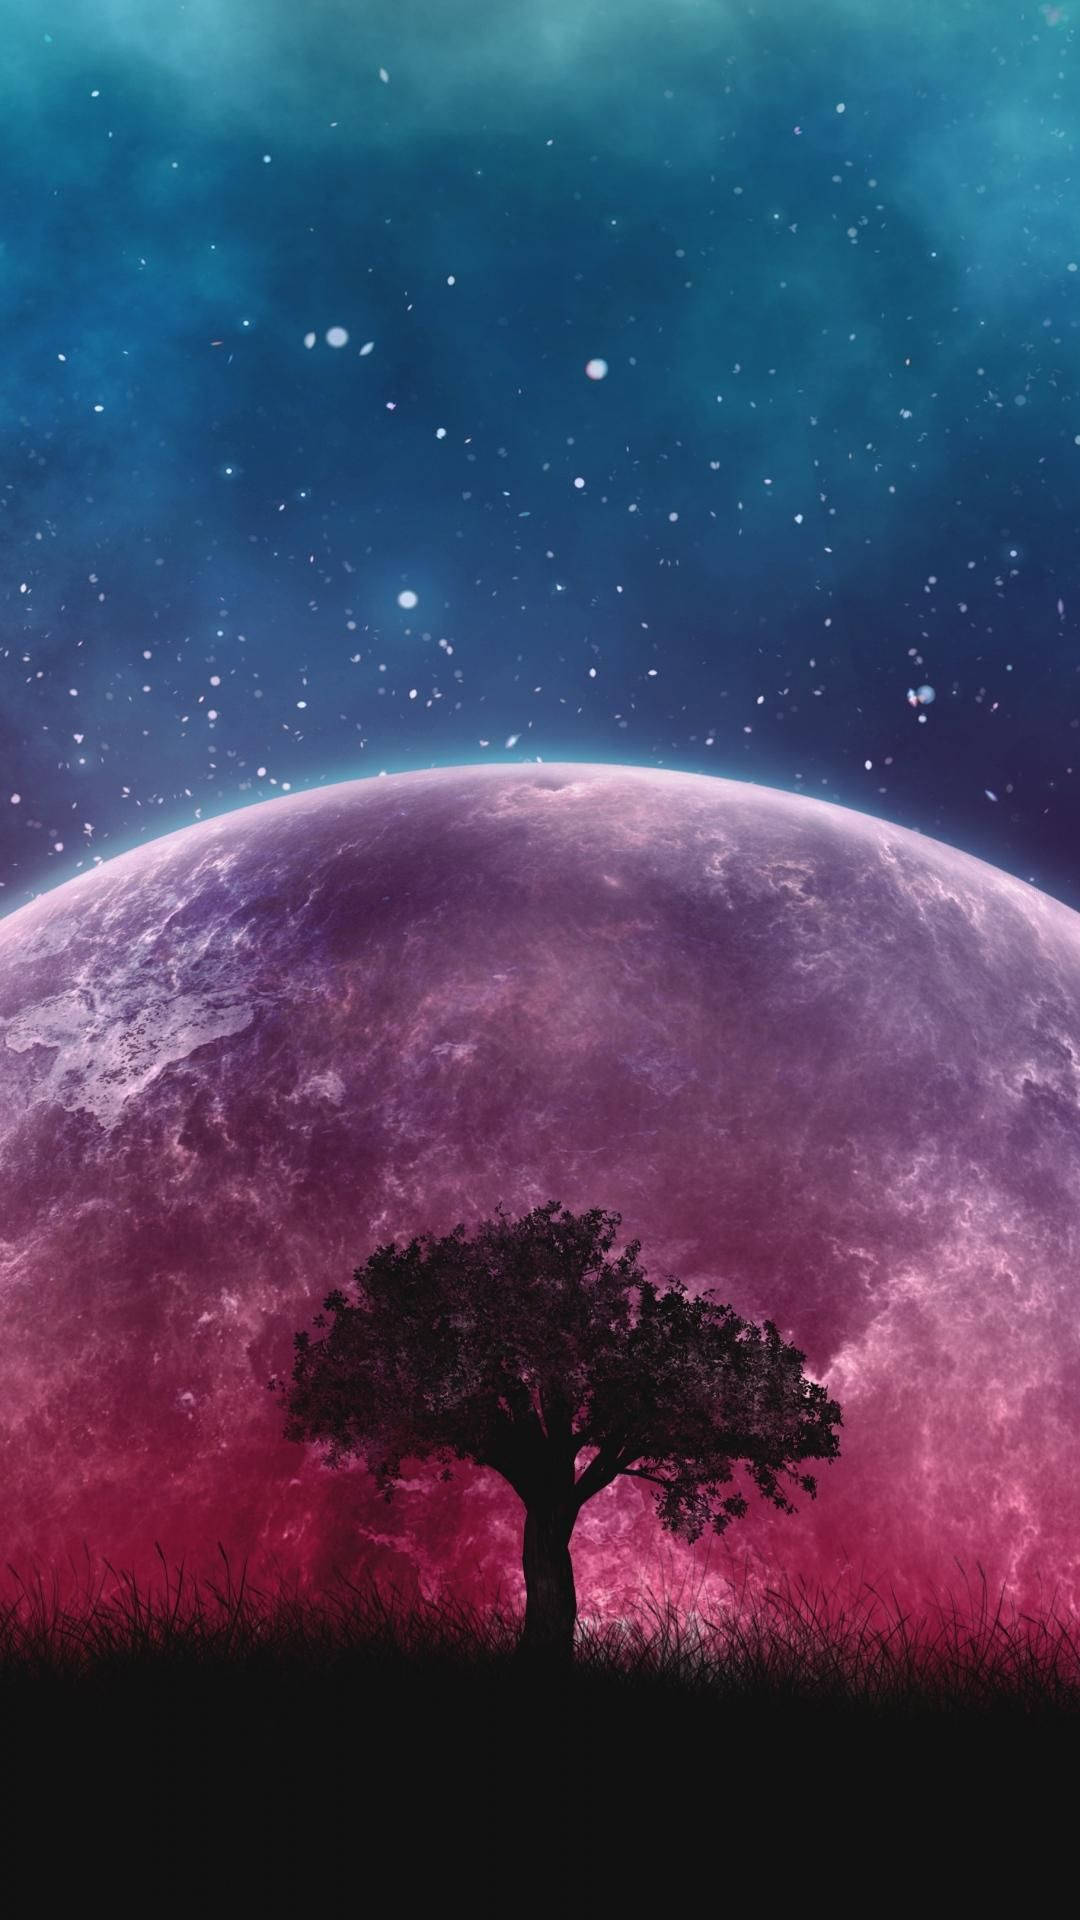 Download Tree Over A Cute Galaxy Wallpaper